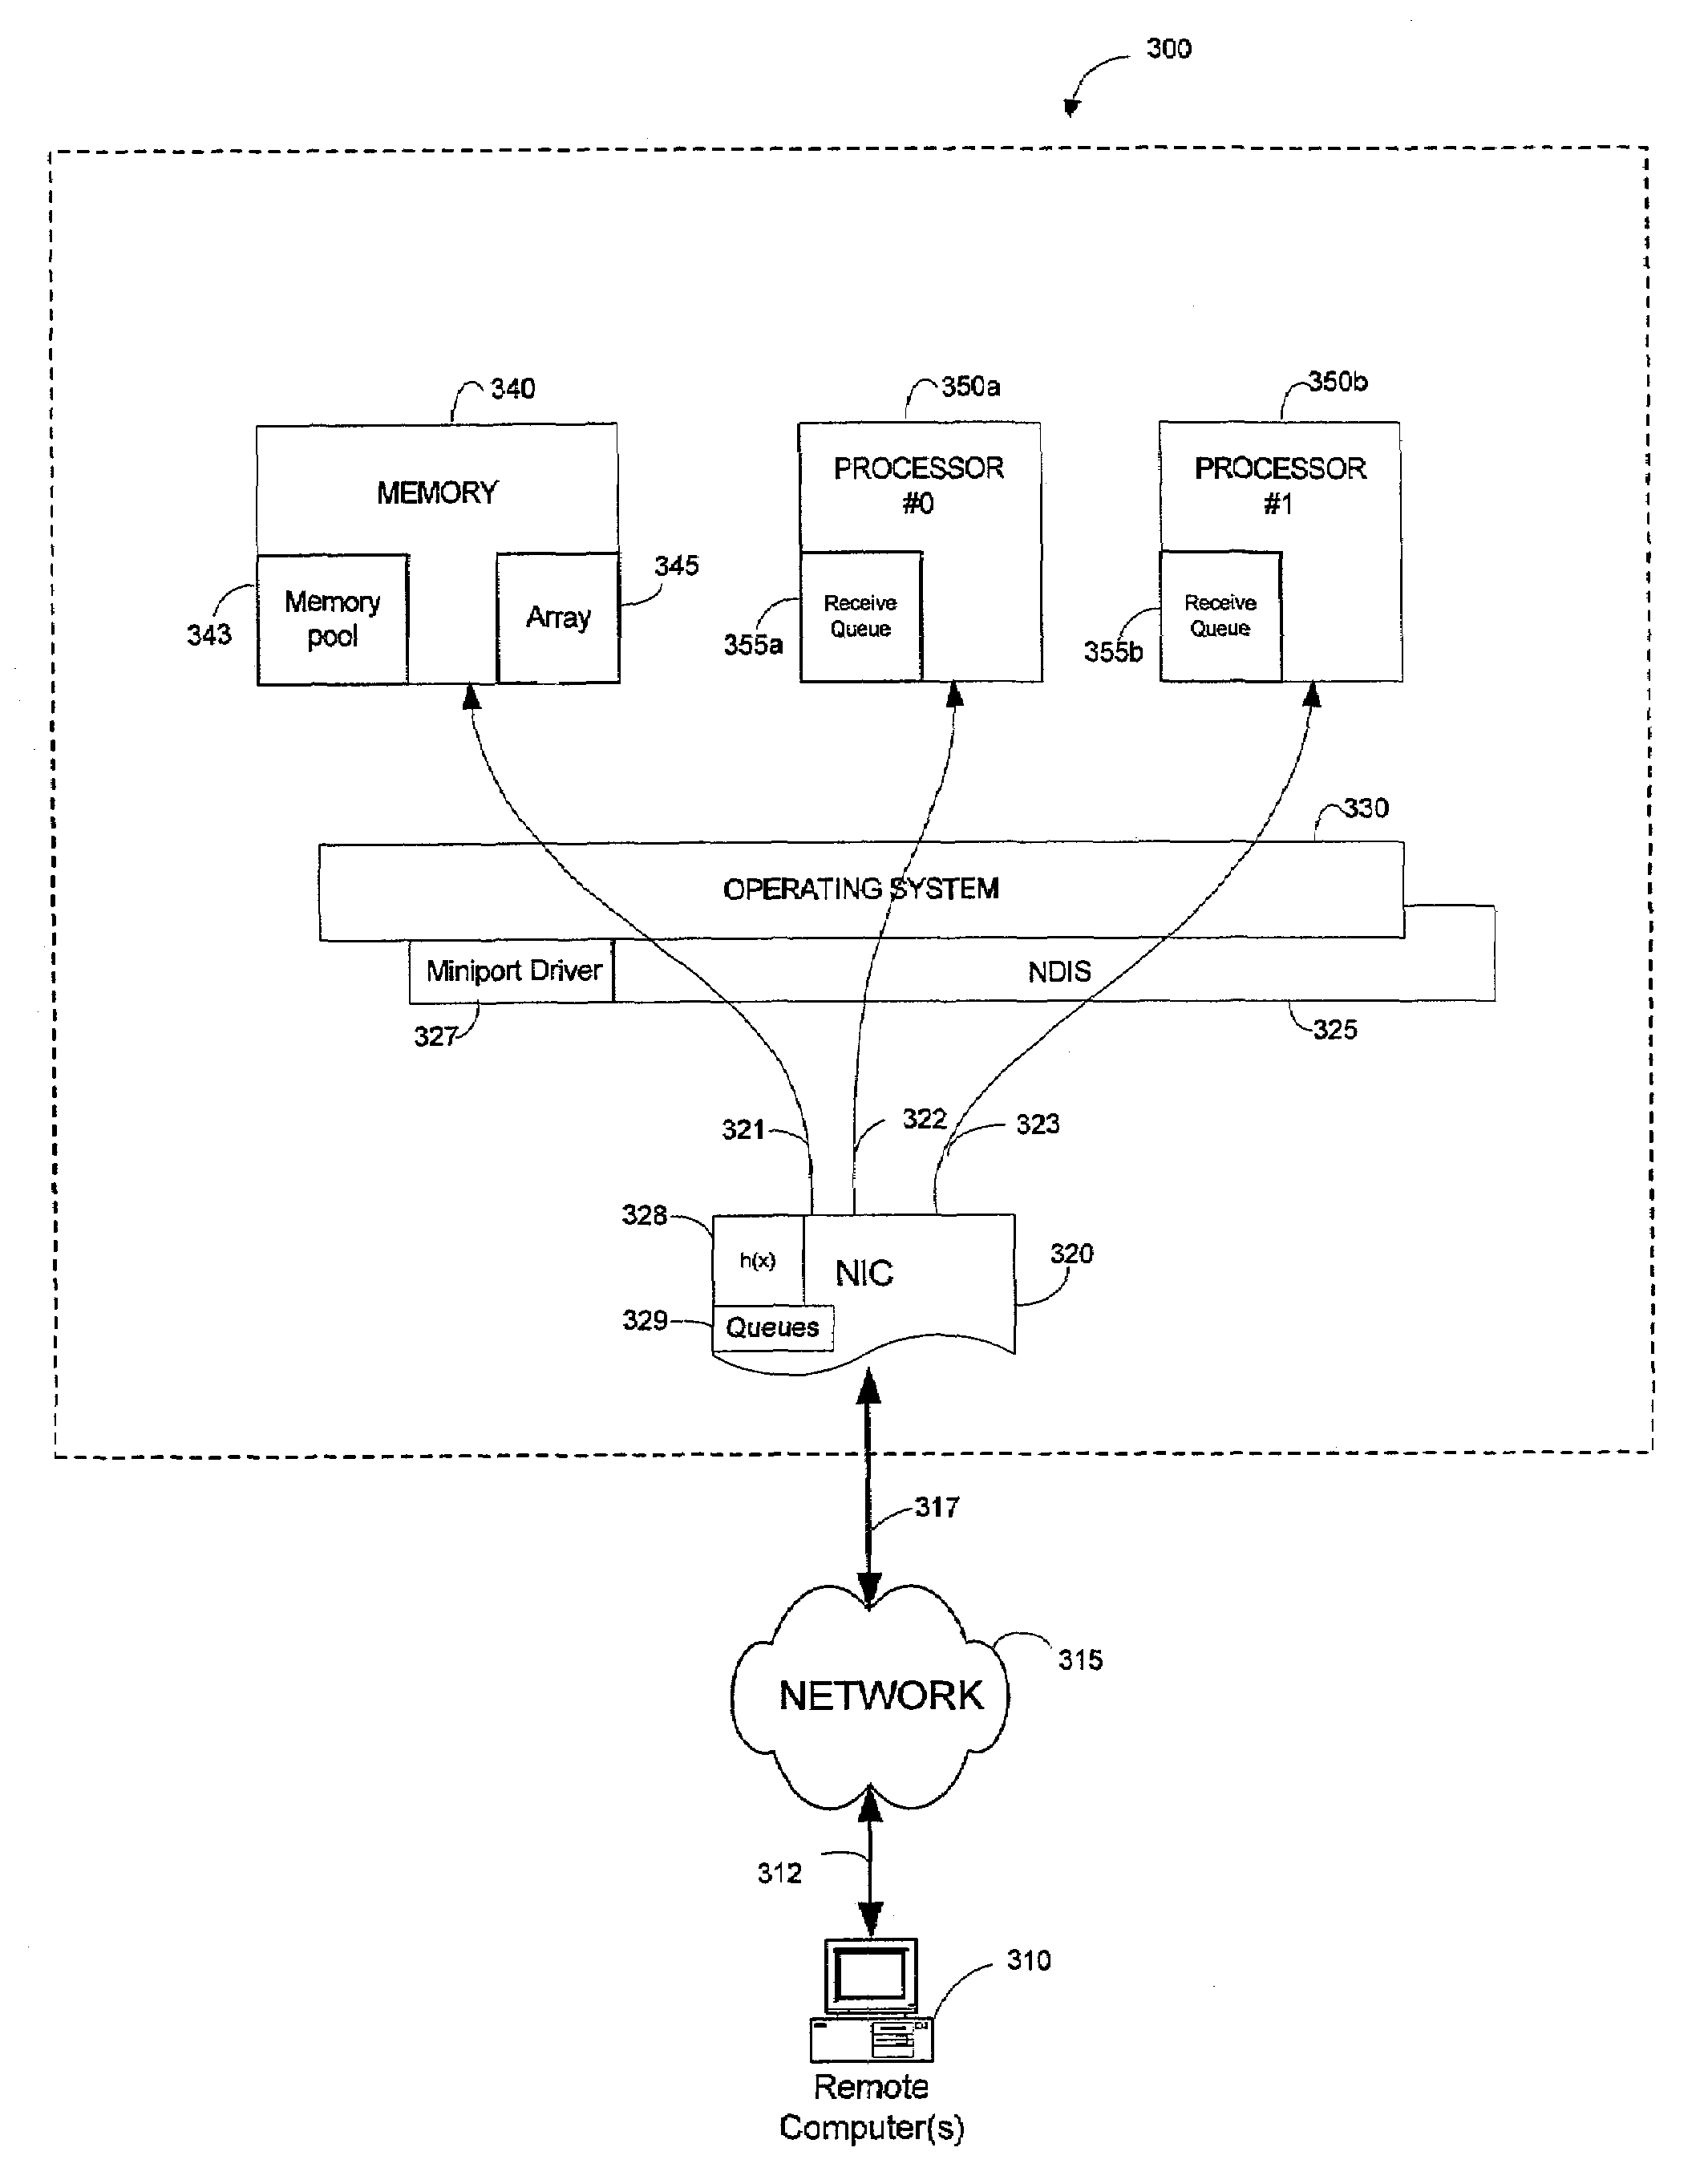 Symmetrical multiprocessing in multiprocessor systems